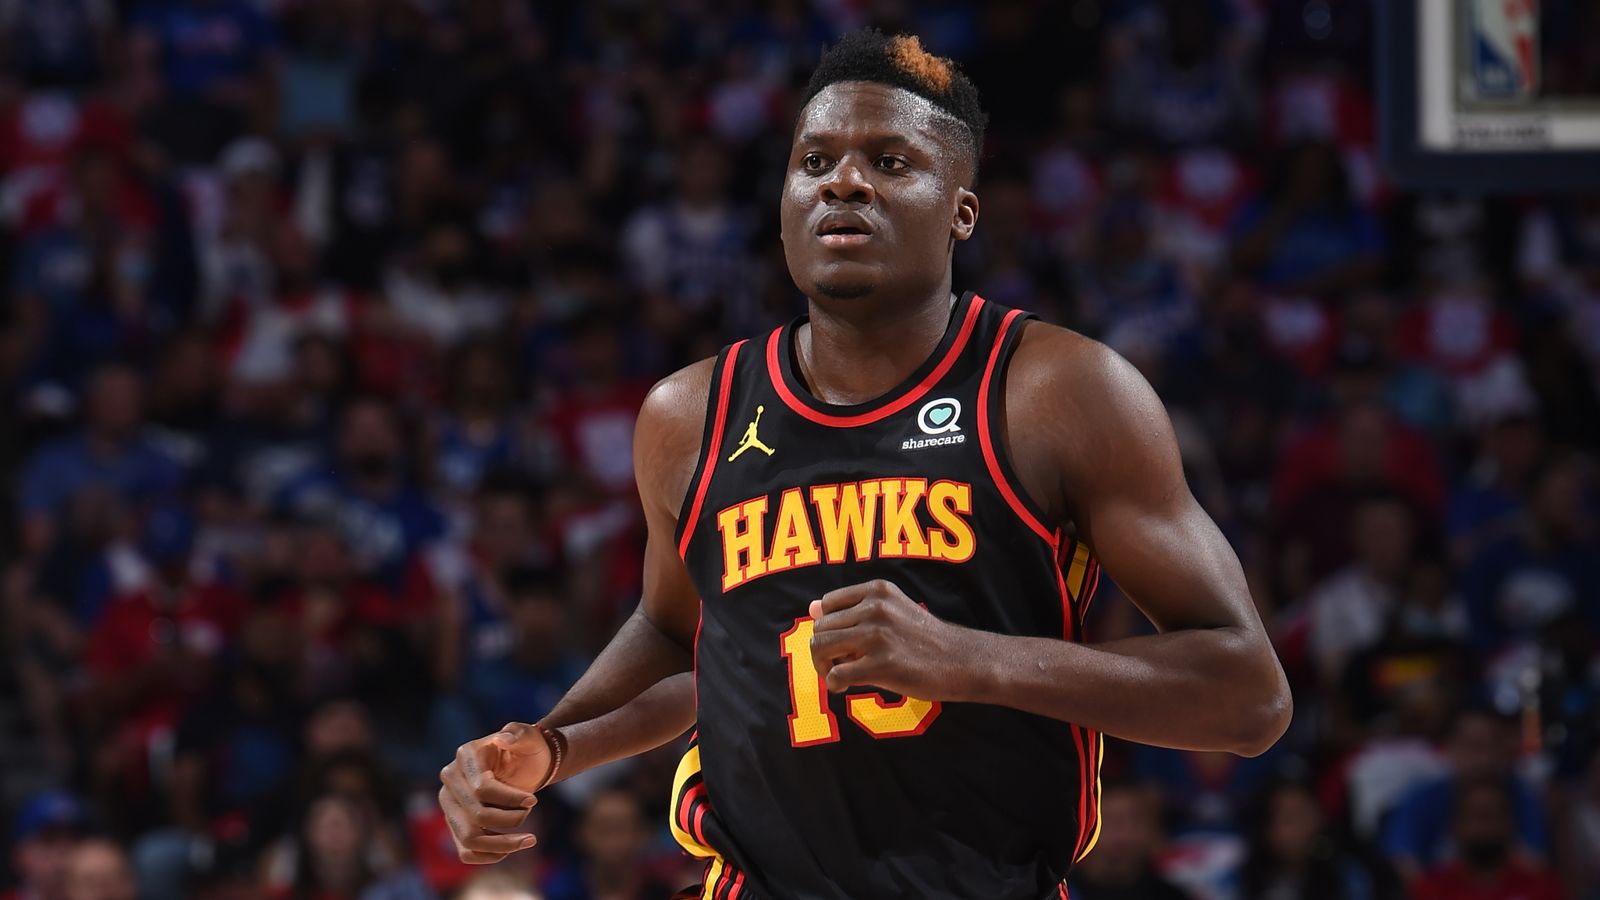 Clint Capela and Atlanta Hawks agree contract extension until 202425